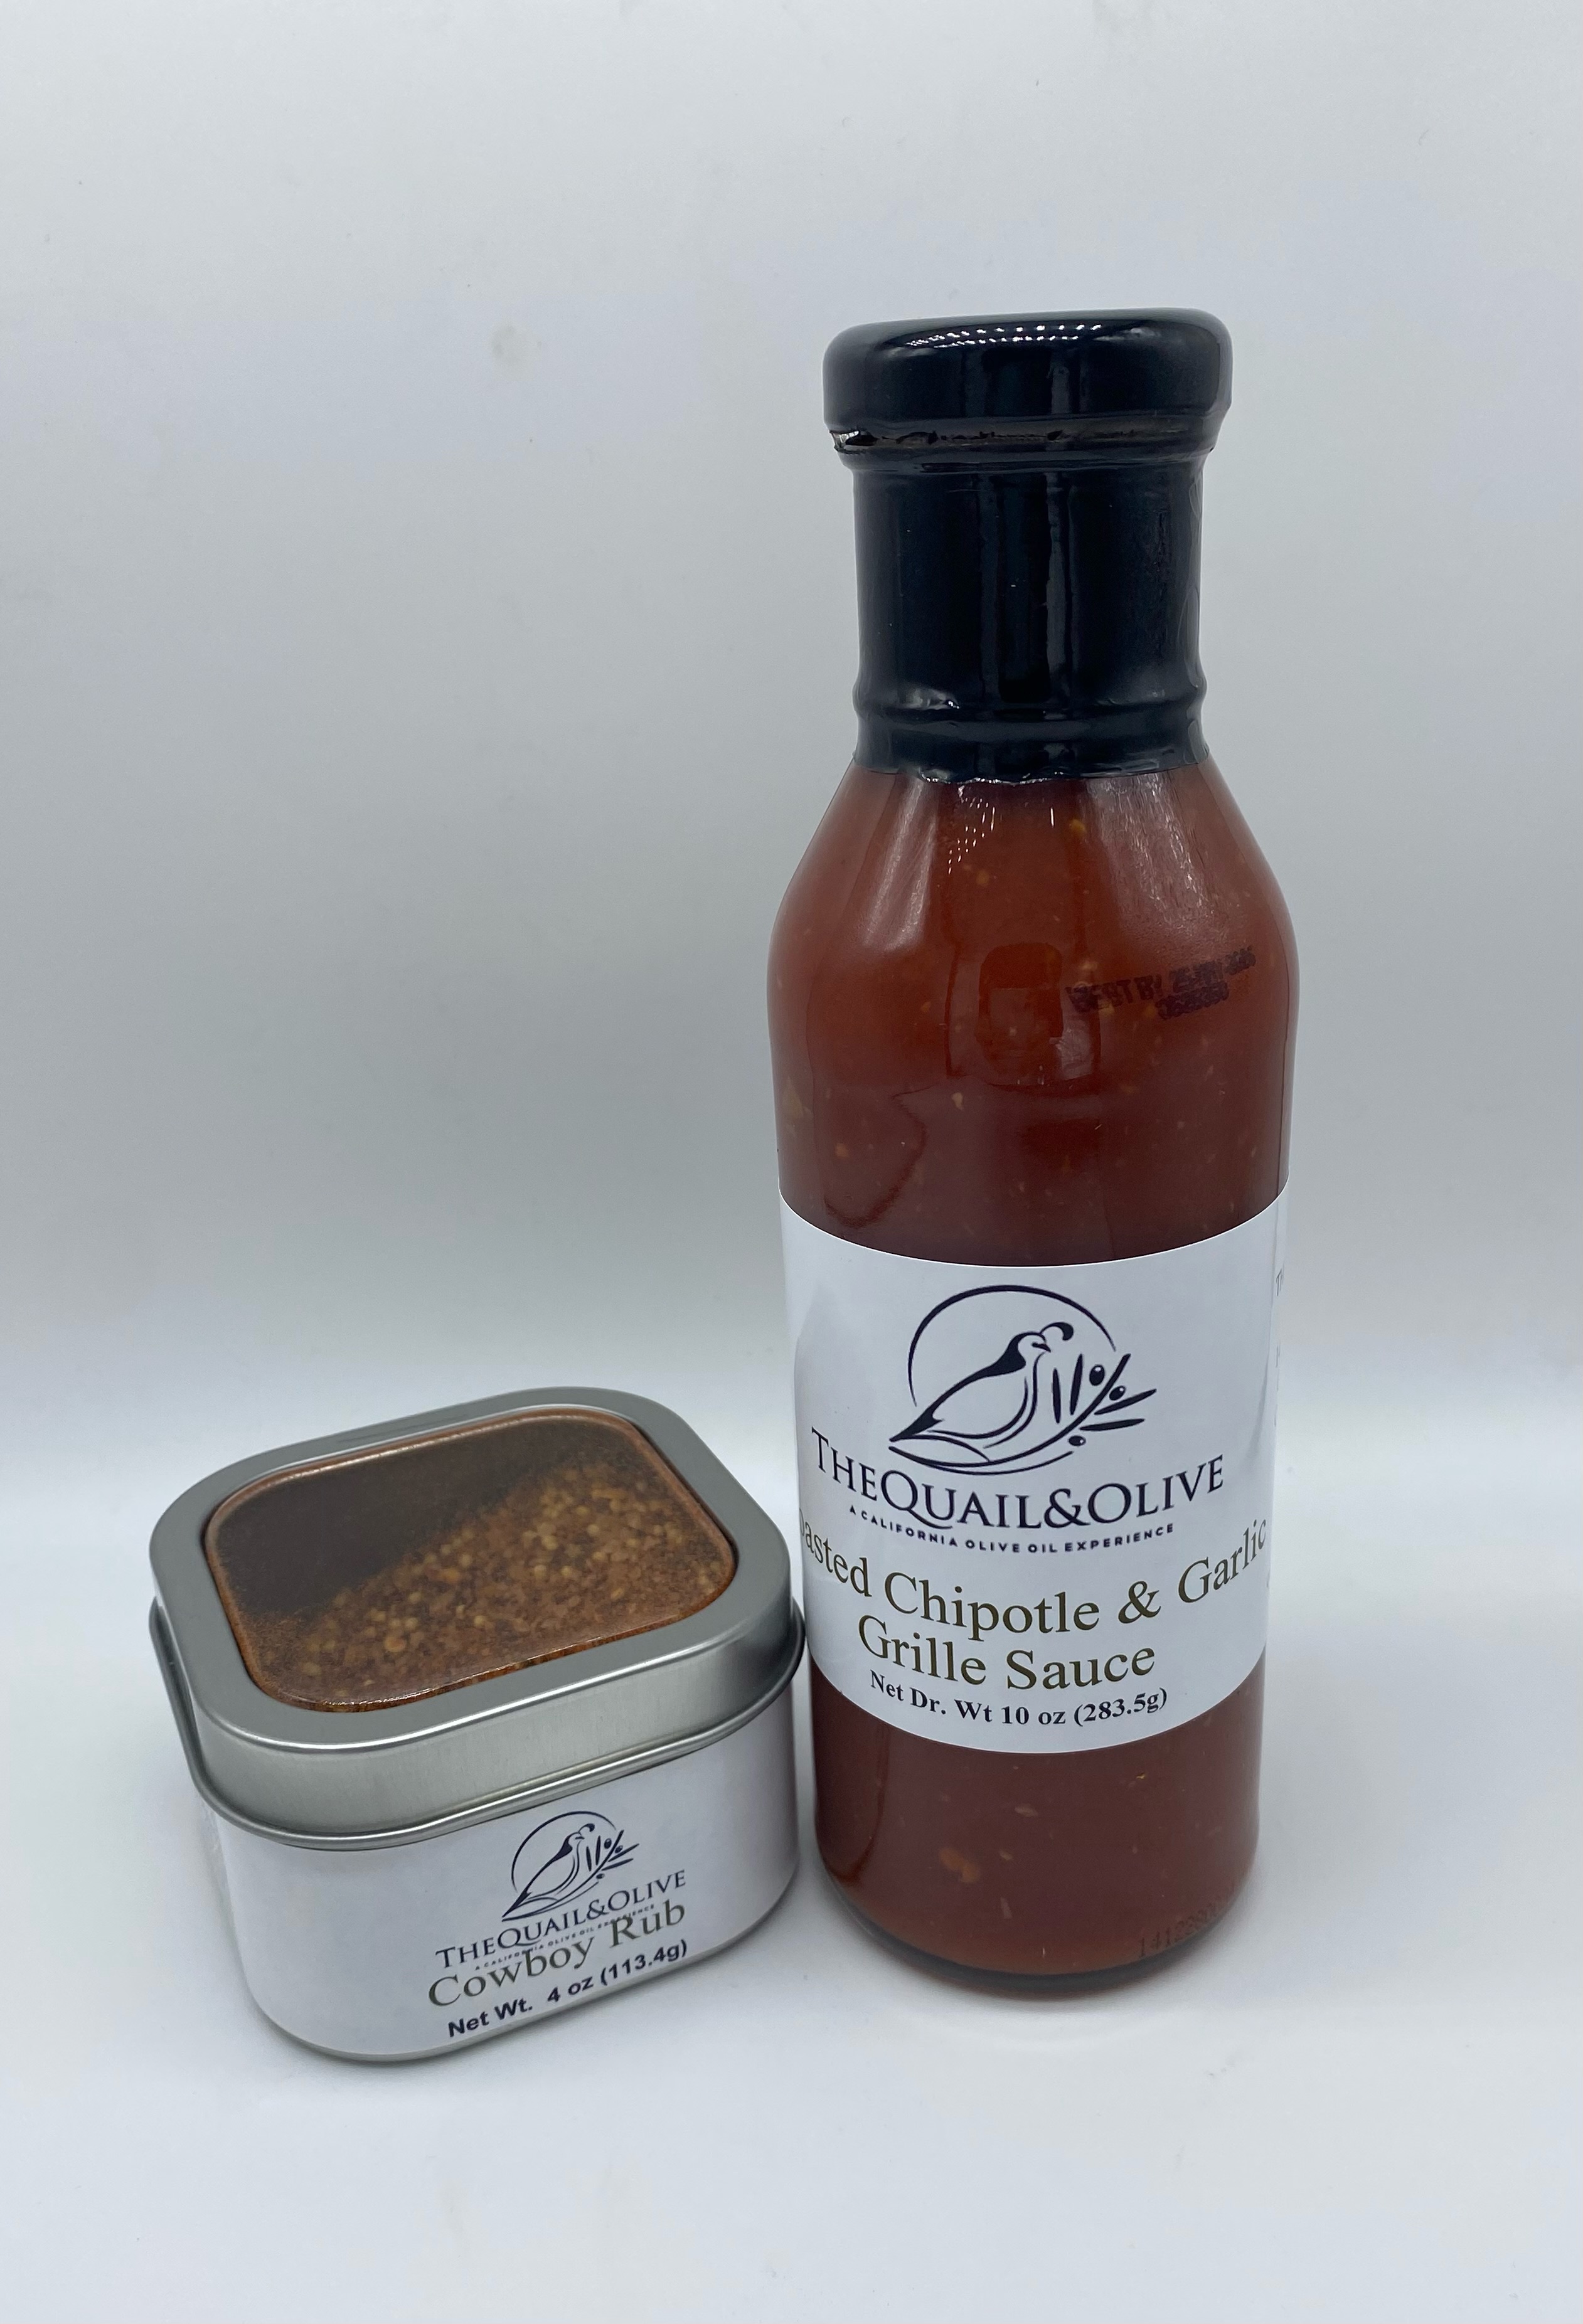 Product Image for Grille Sauce & Rub Set